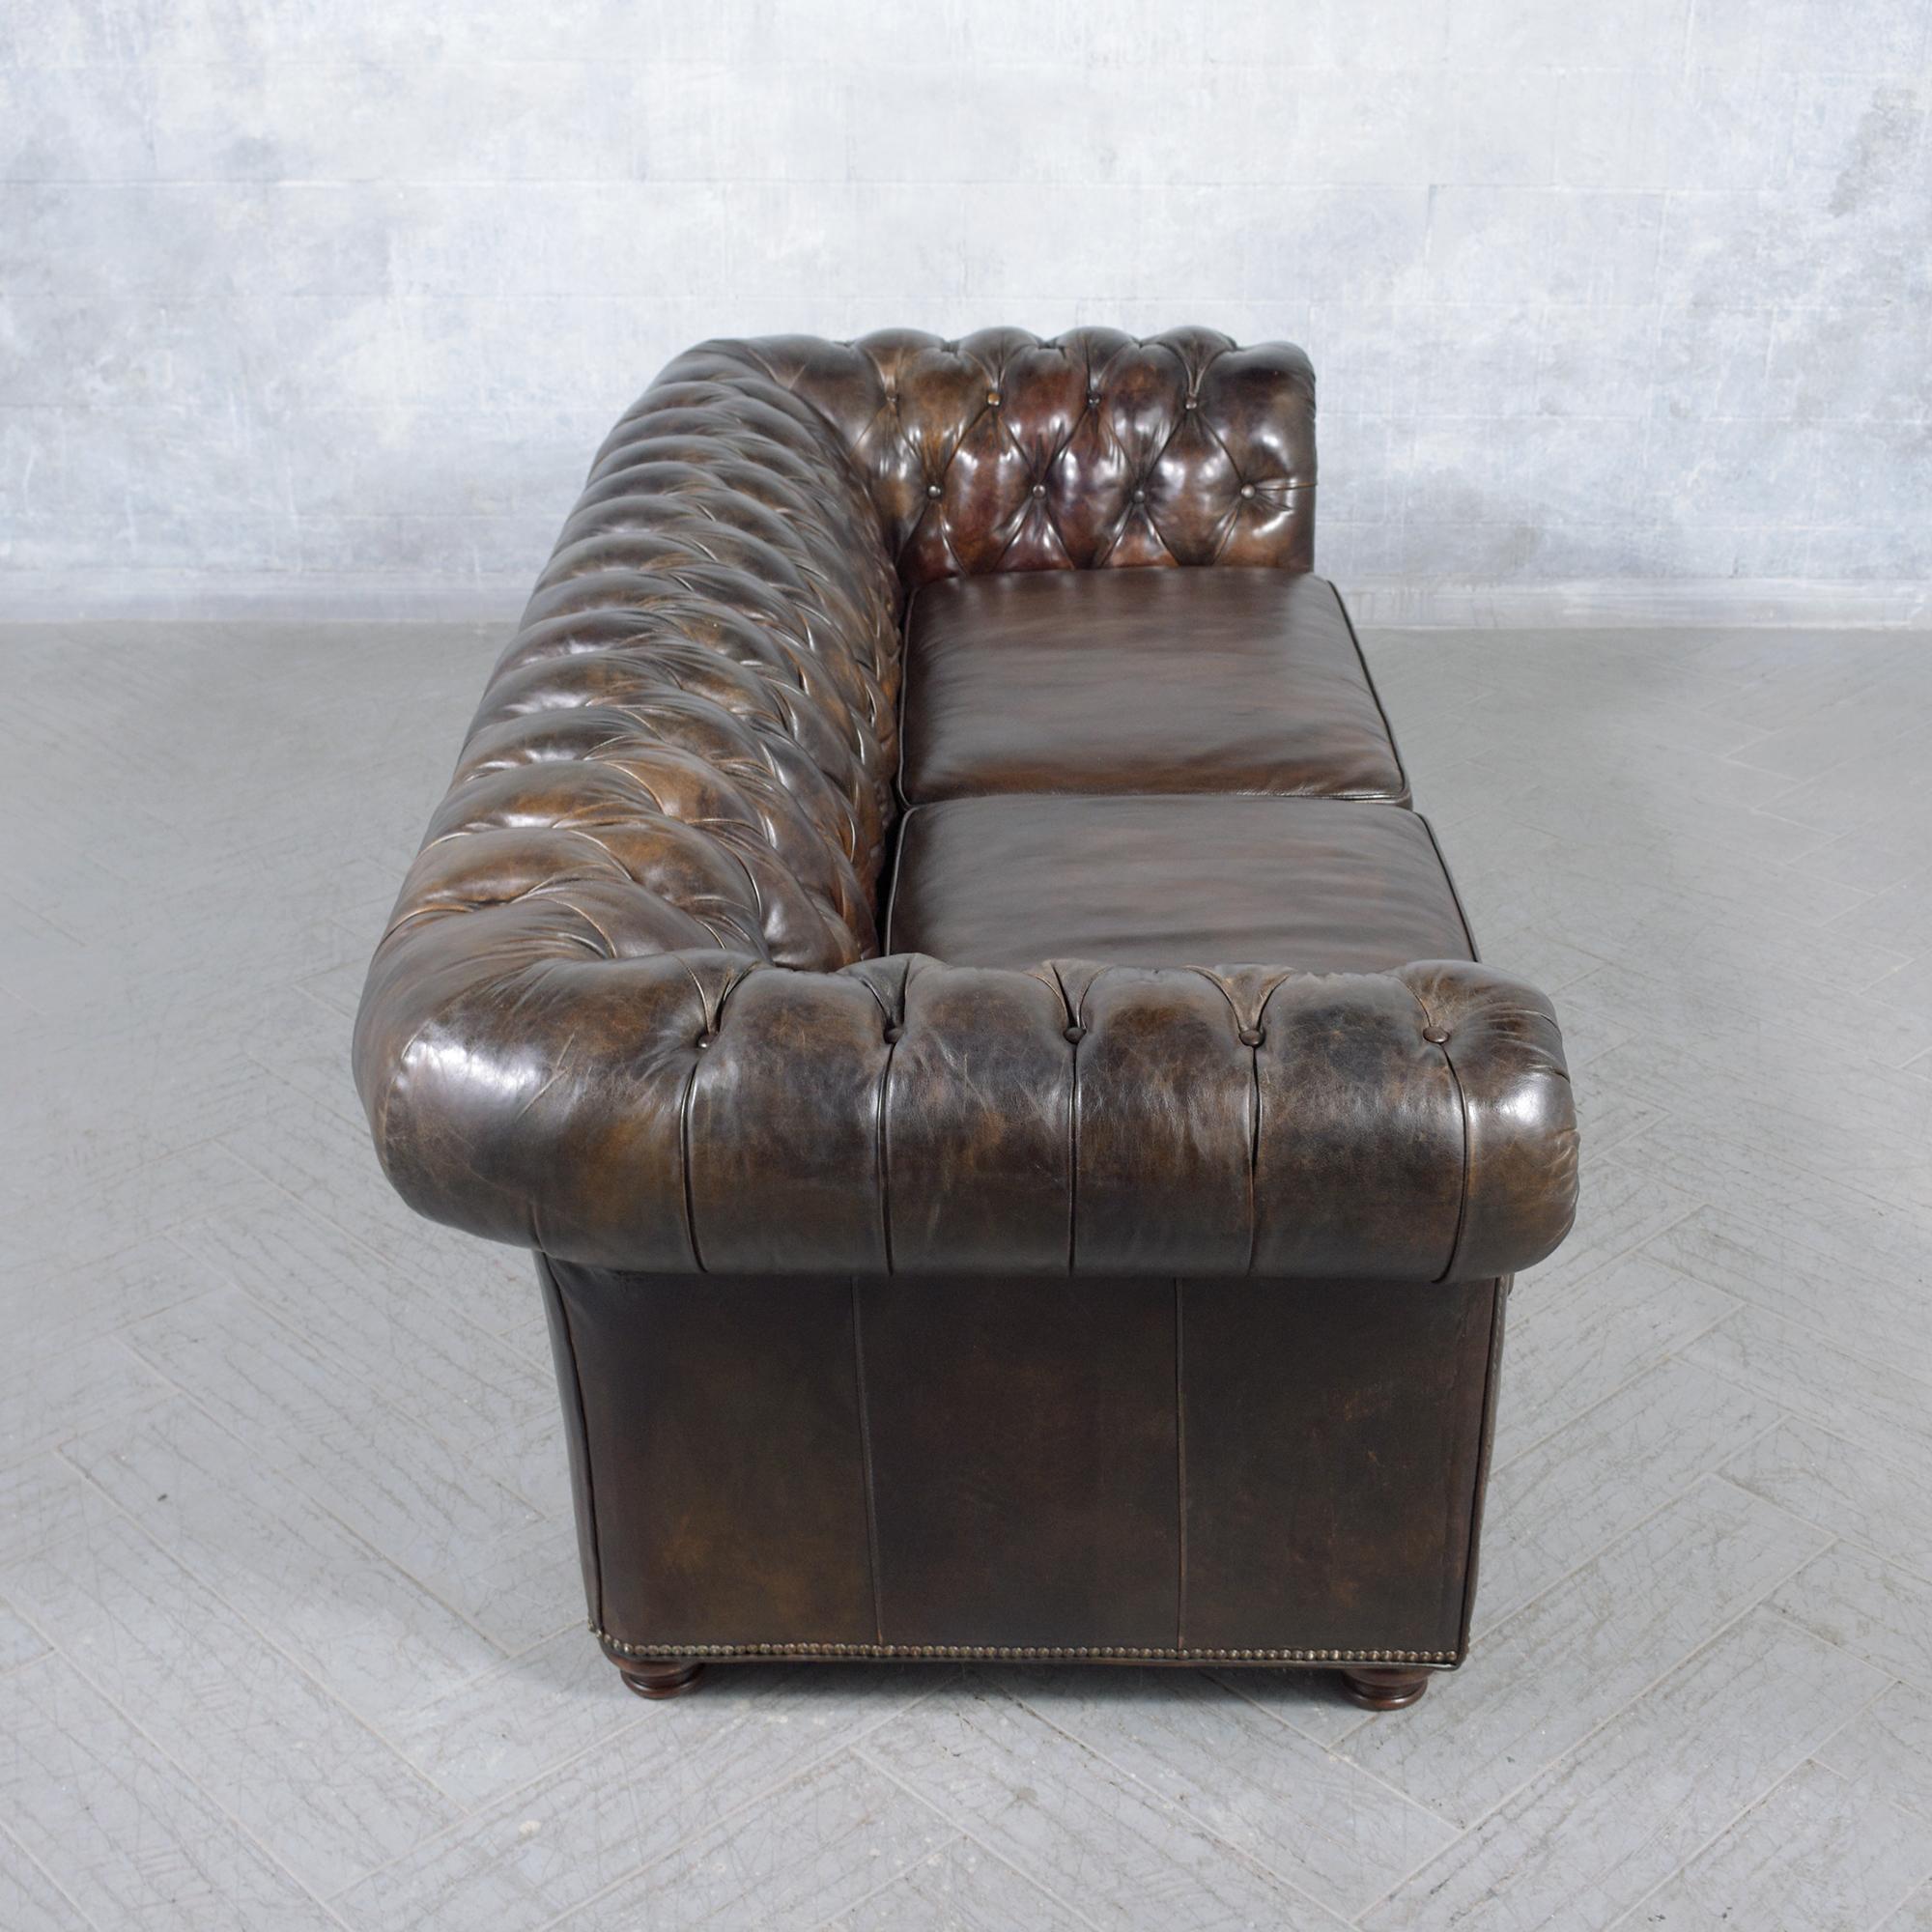 1970s Vintage Chesterfield Sofa: Brown Leather Elegance 3